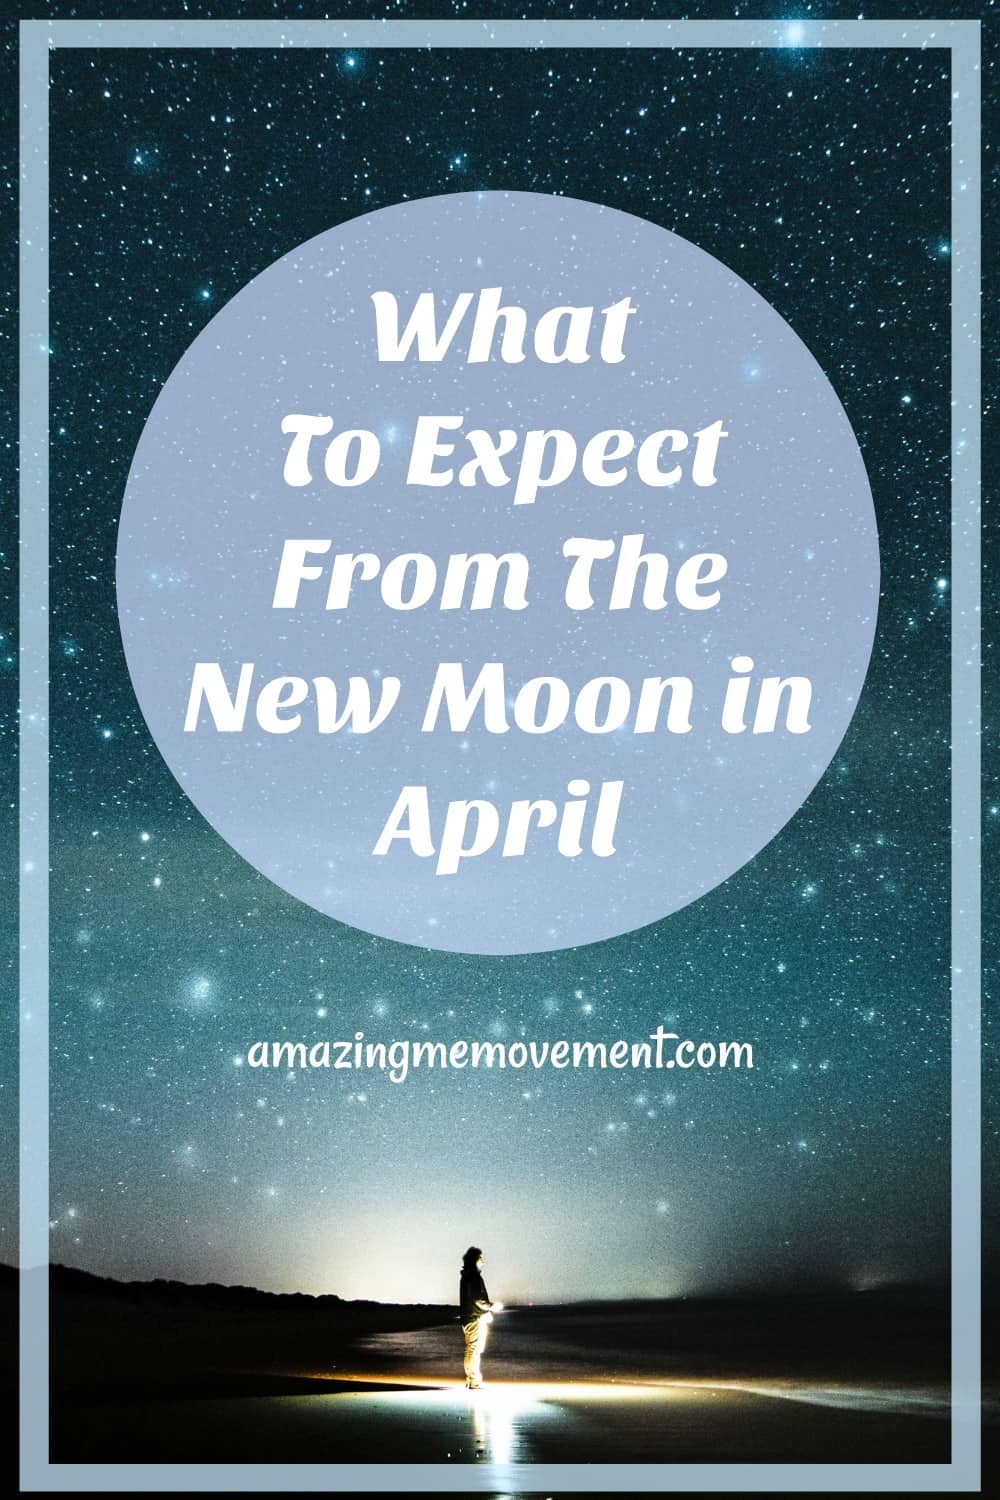 When is the next new moon?